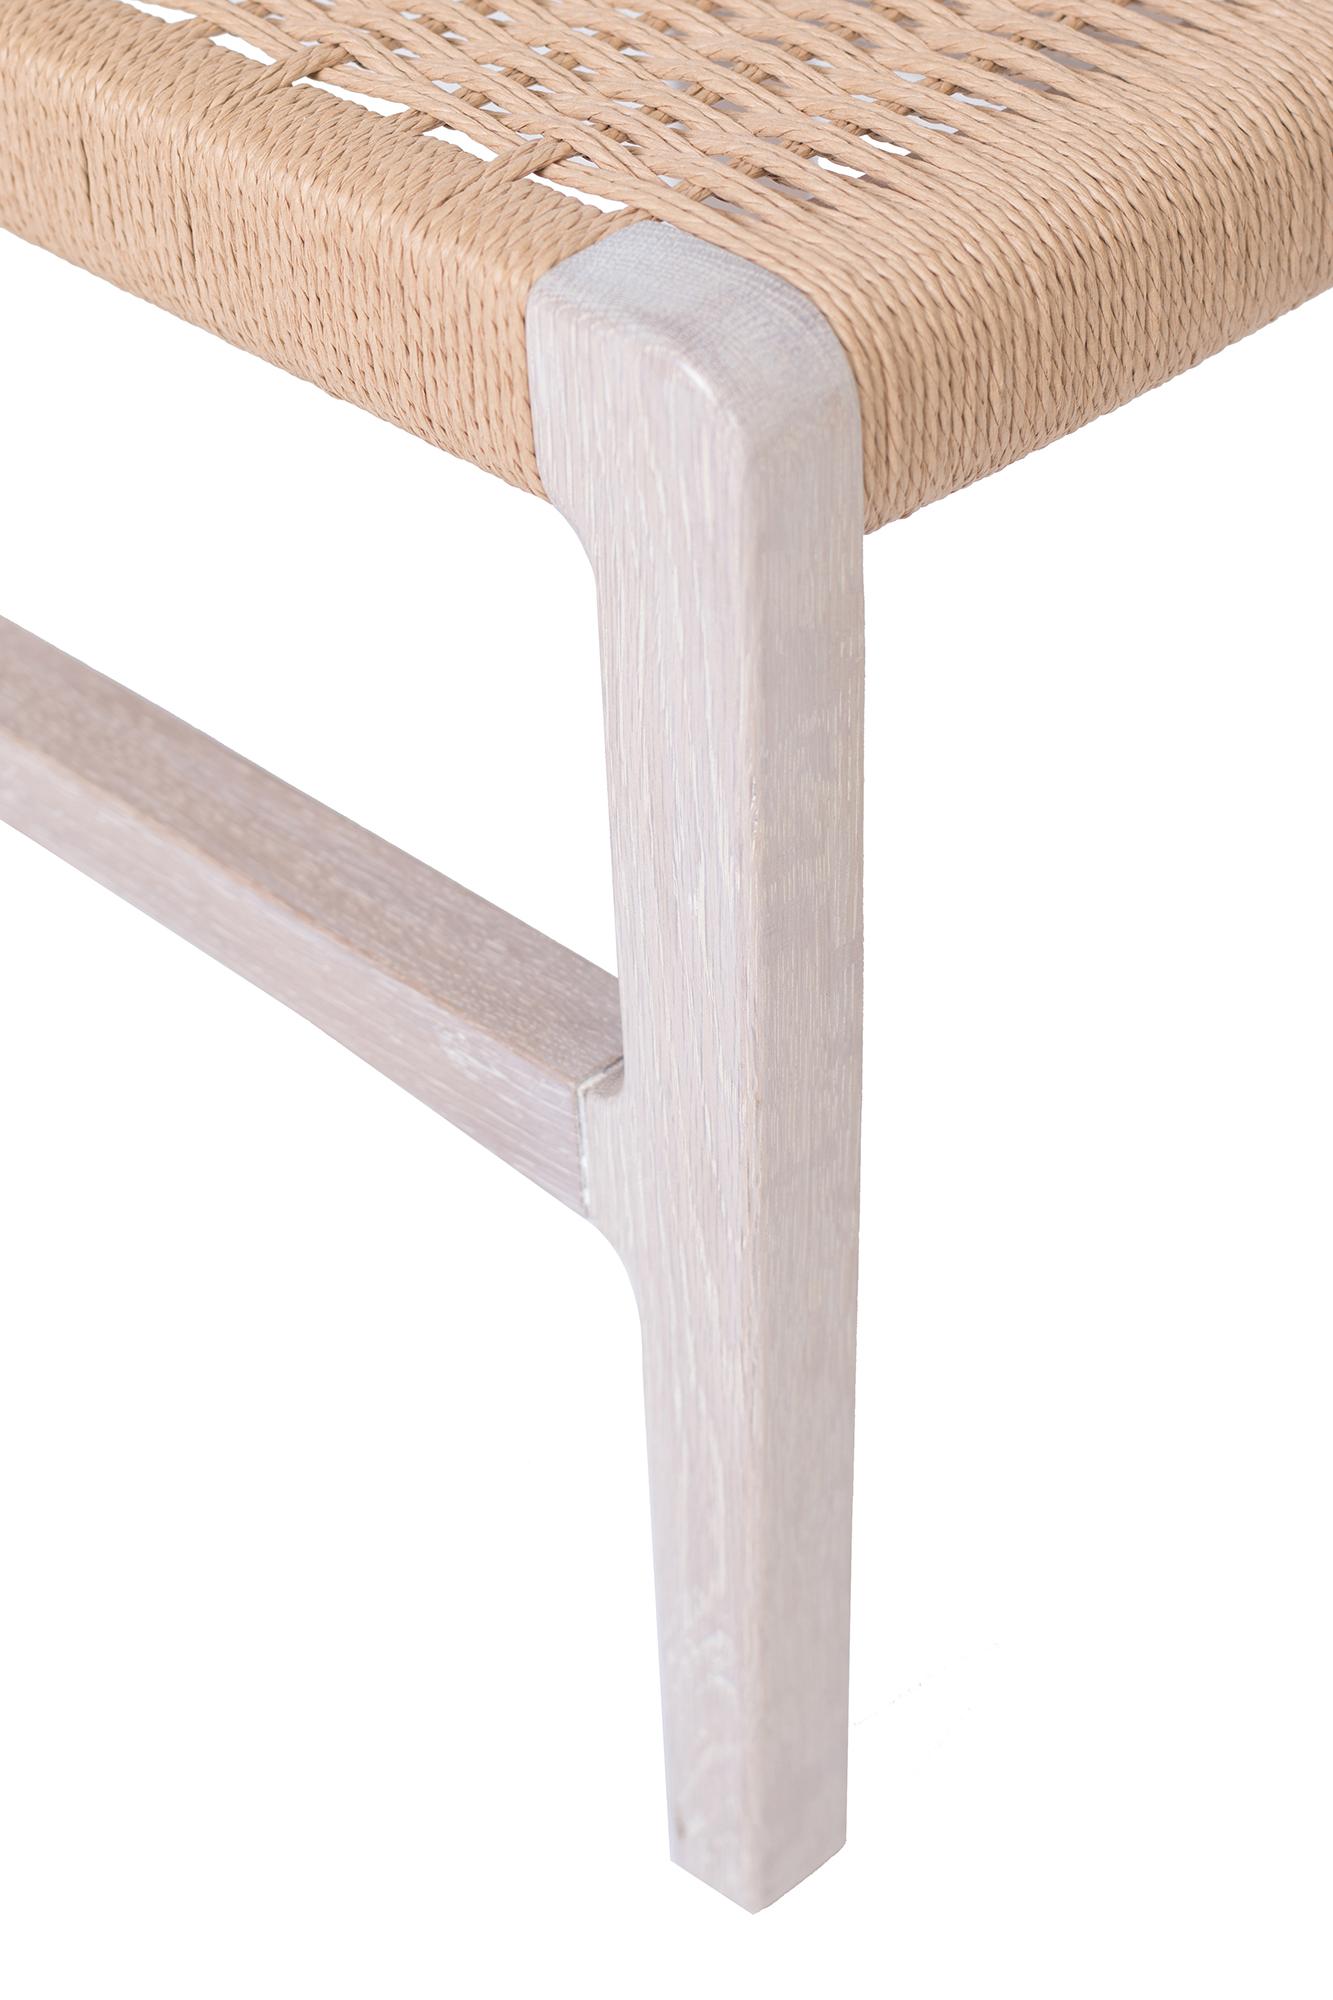 North American Giacomo Stool / Ottoman in Whitewashed Oak with Danish Cord